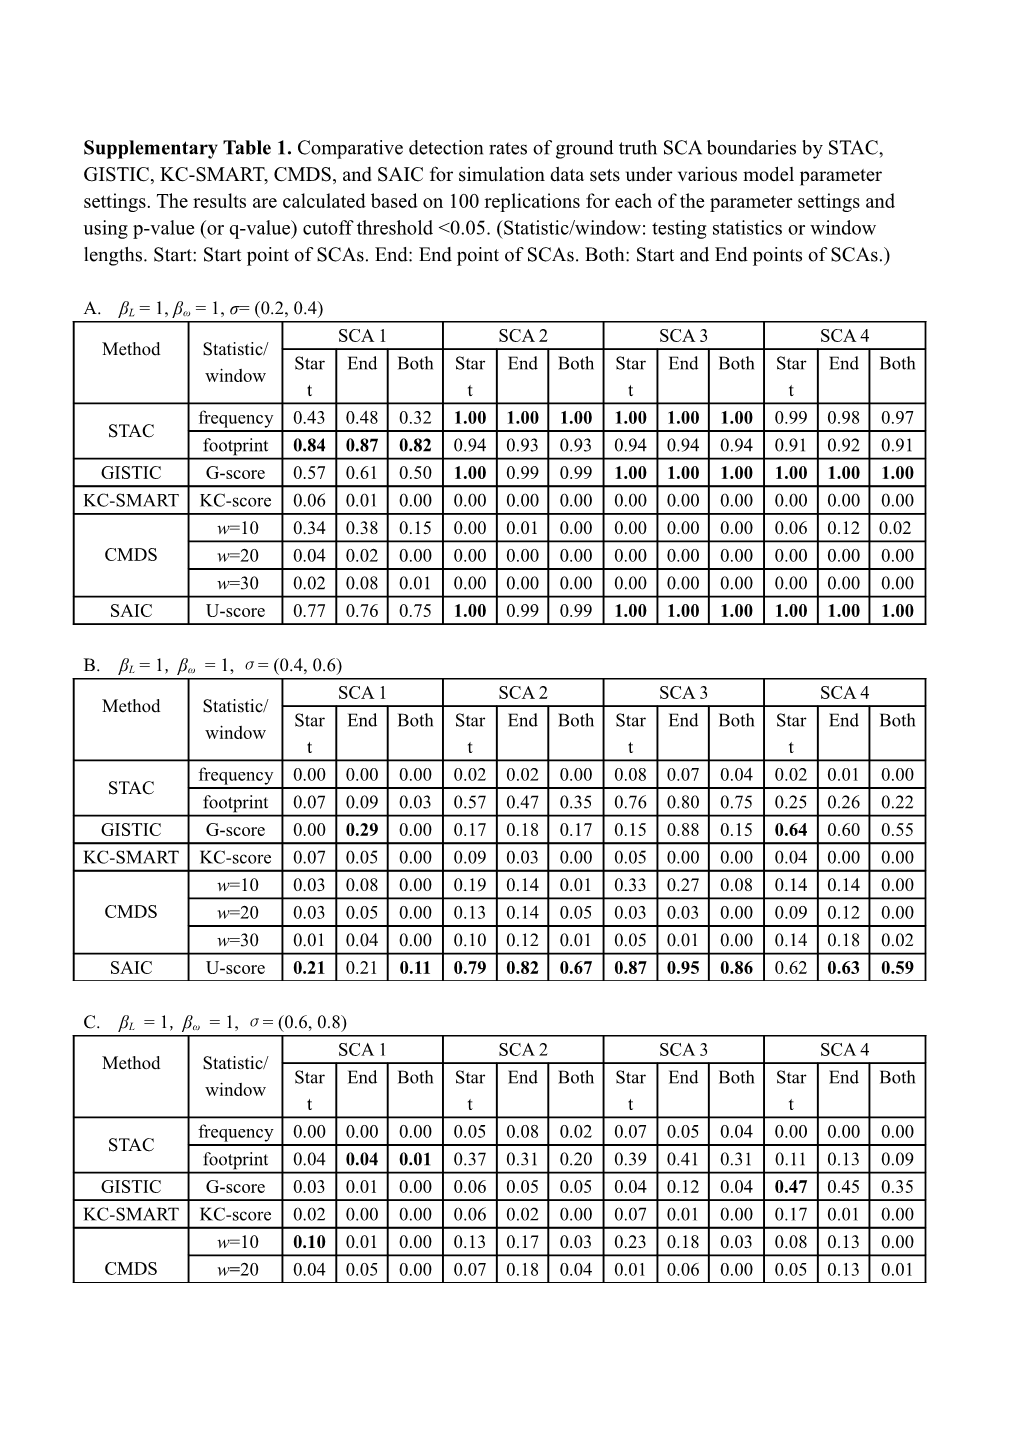 Supplementary Table 1. Comparative Detection Rates of Ground Truth SCA Boundaries Bystac